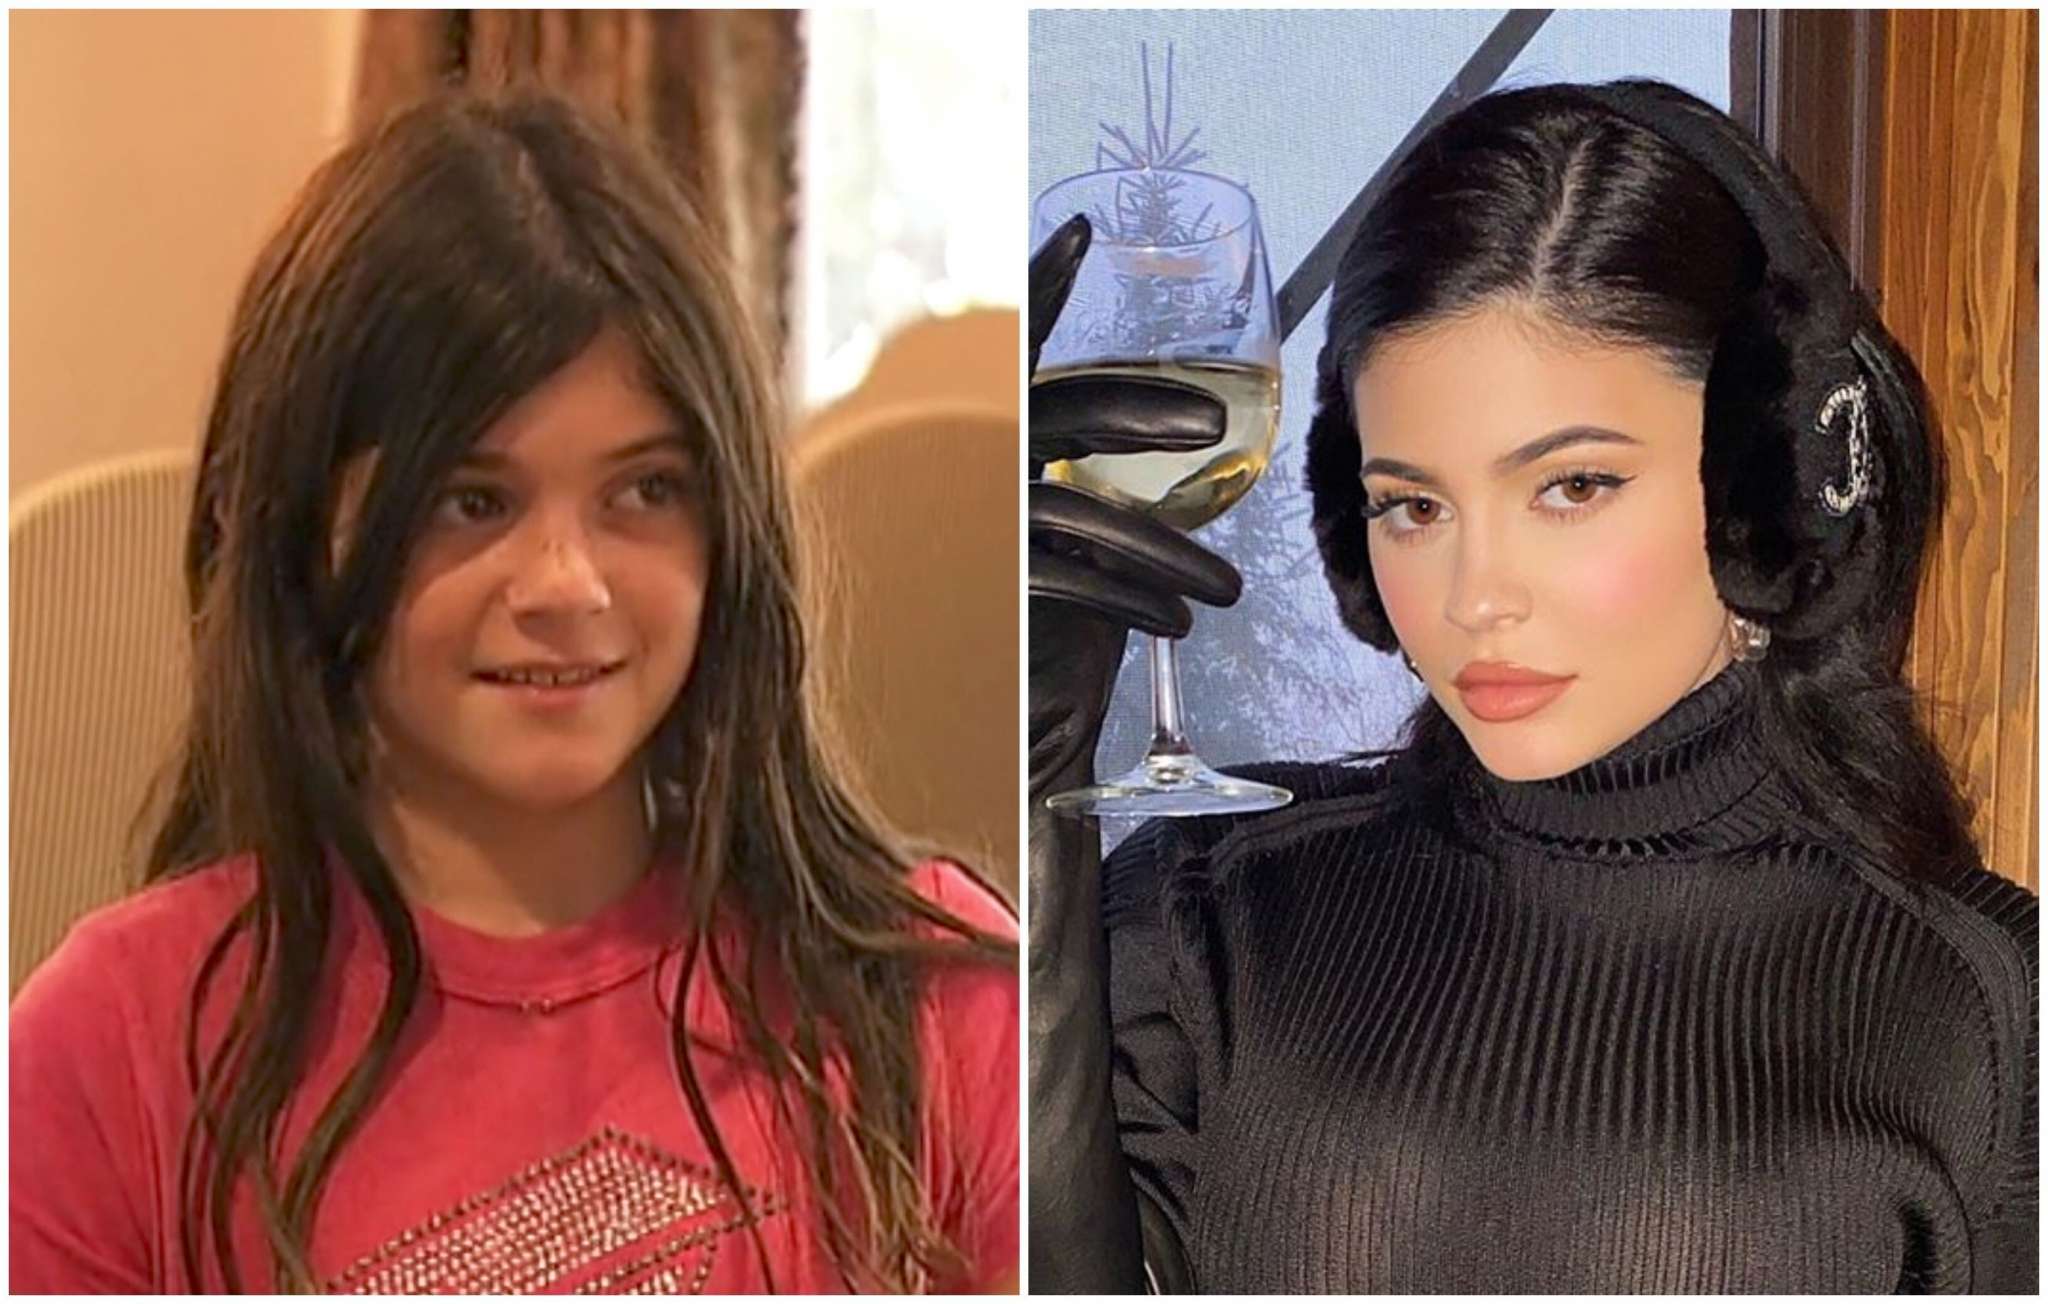 kuwtk-kylie-jenner-says-that-lip-fillers-helped-with-her-insecurities